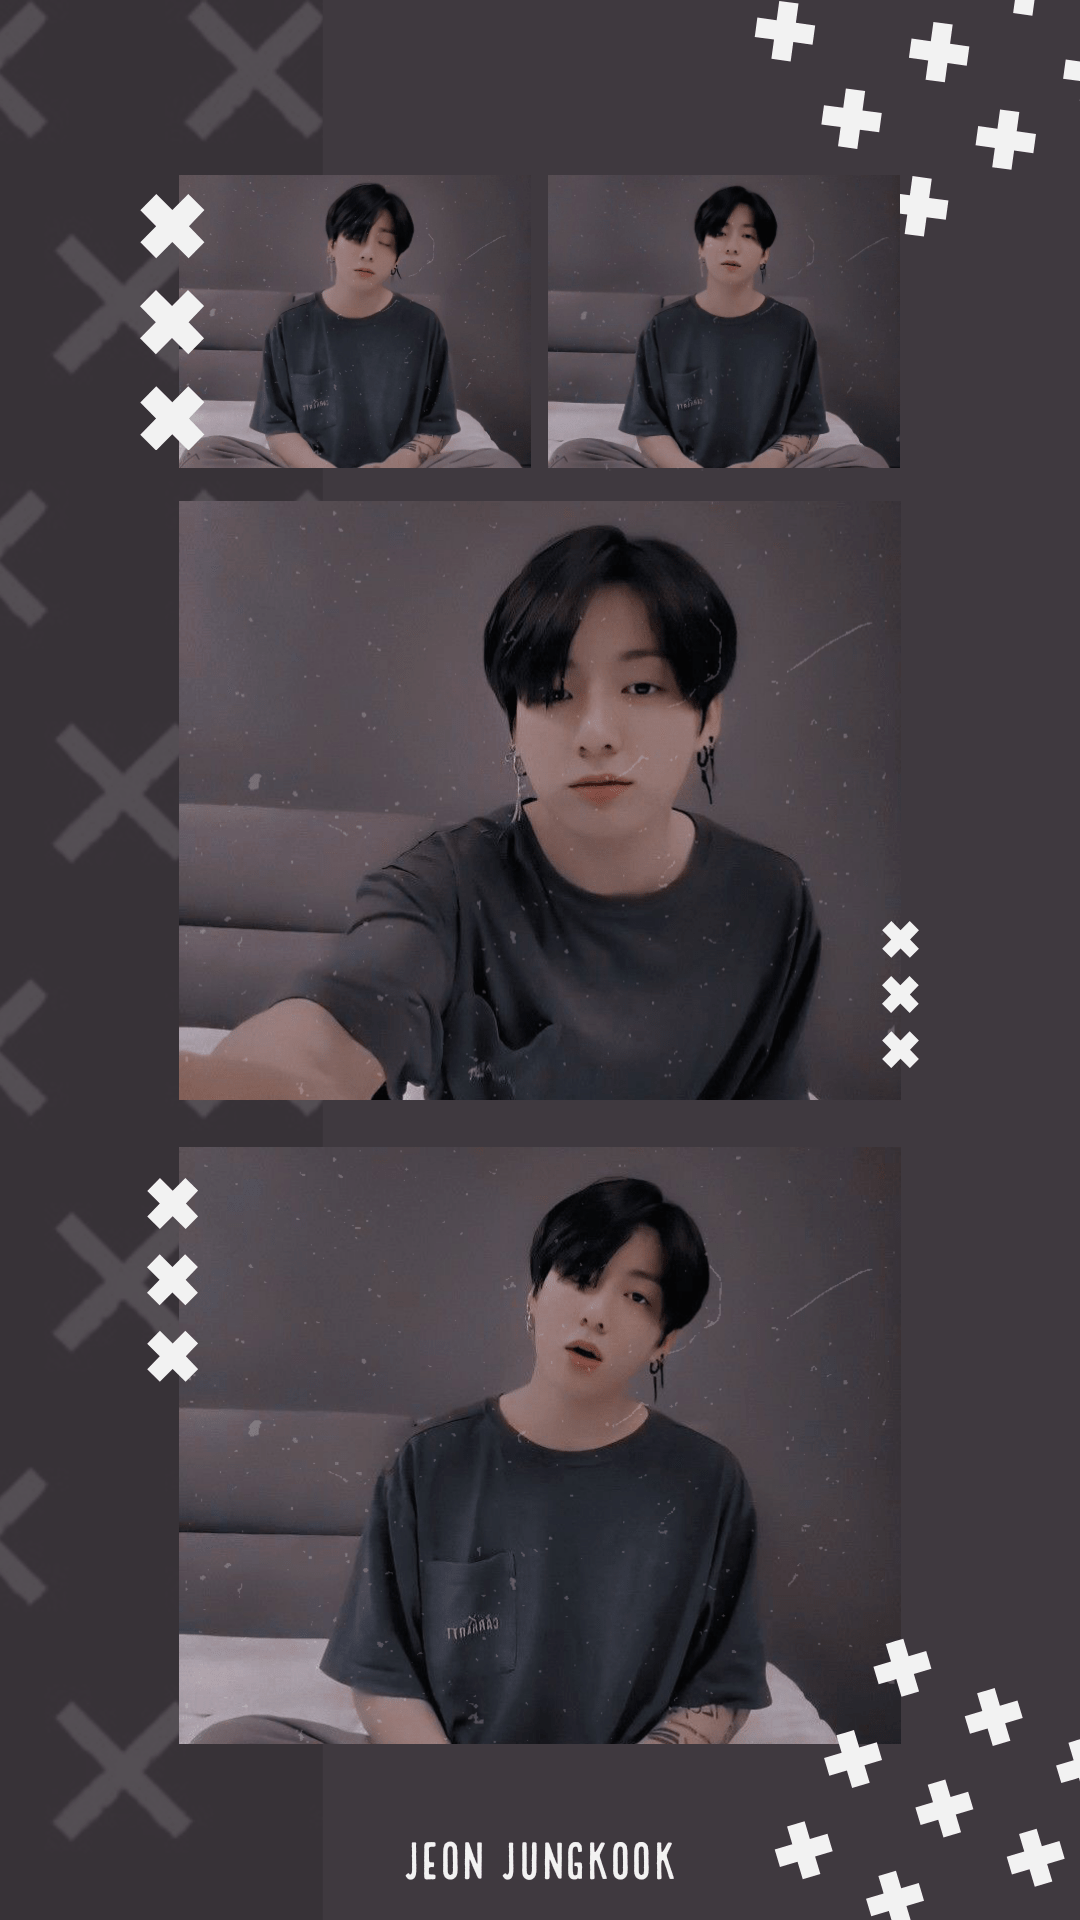 Free download pudin milkychoco Profiles Jungkook aesthetic Jungkook Jungkook [1080x1920] for your Desktop, Mobile & Tablet. Explore Jungkook Collage Wallpaper. Collage Background, Custom Photo Collage Wallpaper, Make a Wallpaper Collage